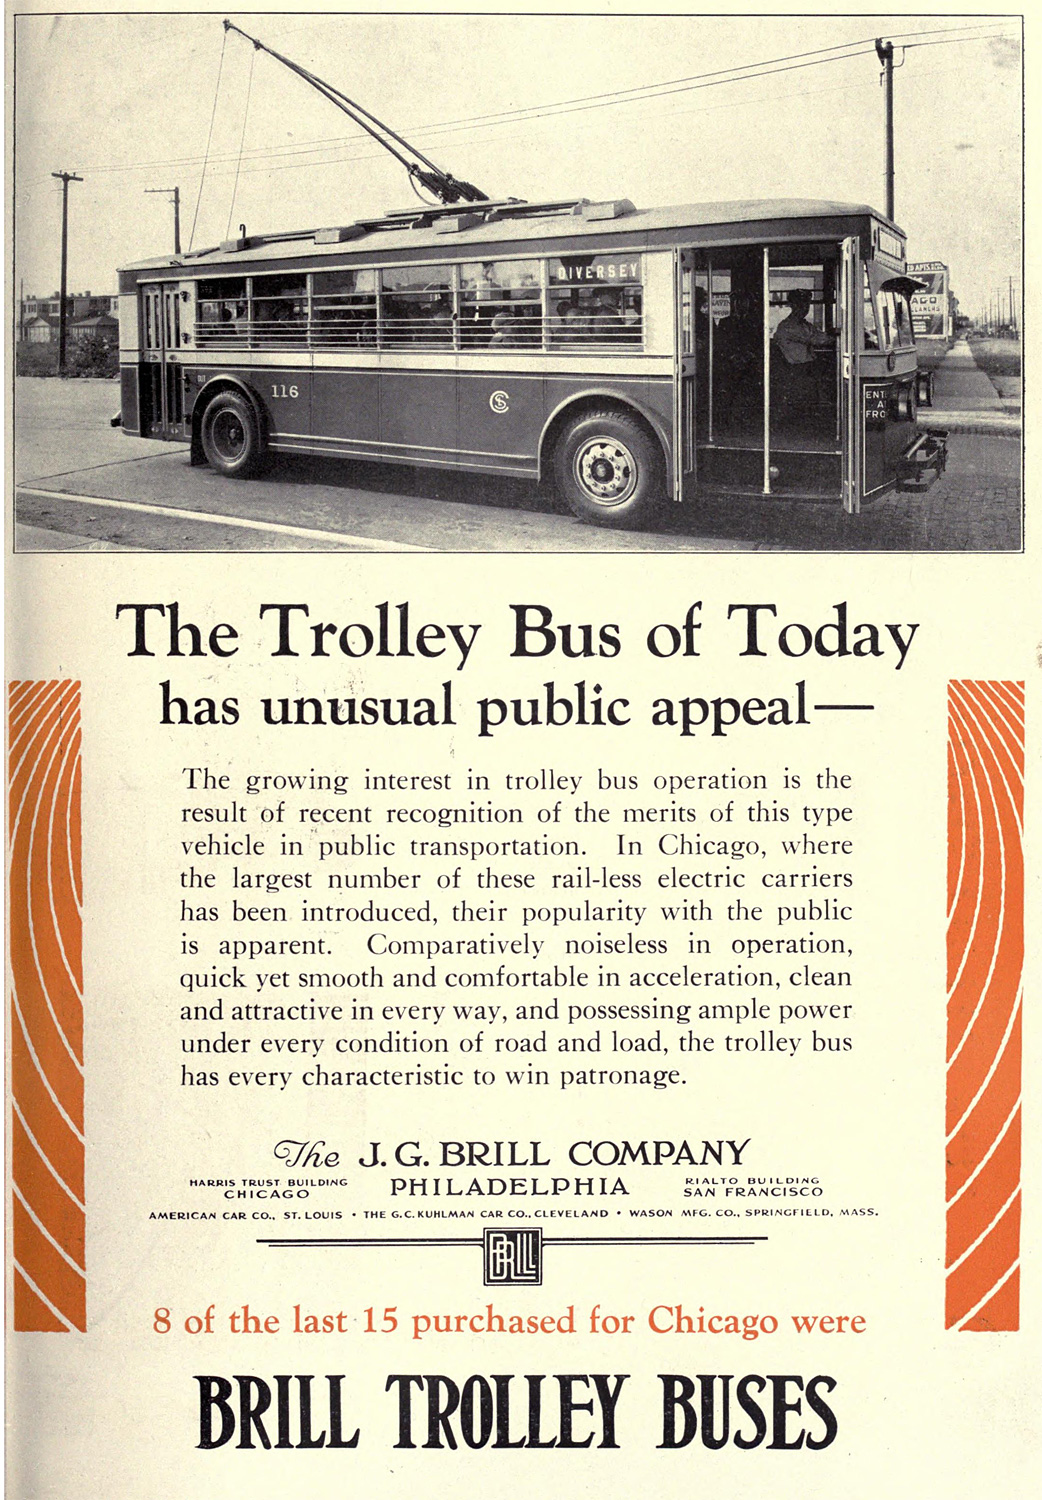 Chicago, Brill T40 # 116; Advertising and documentation